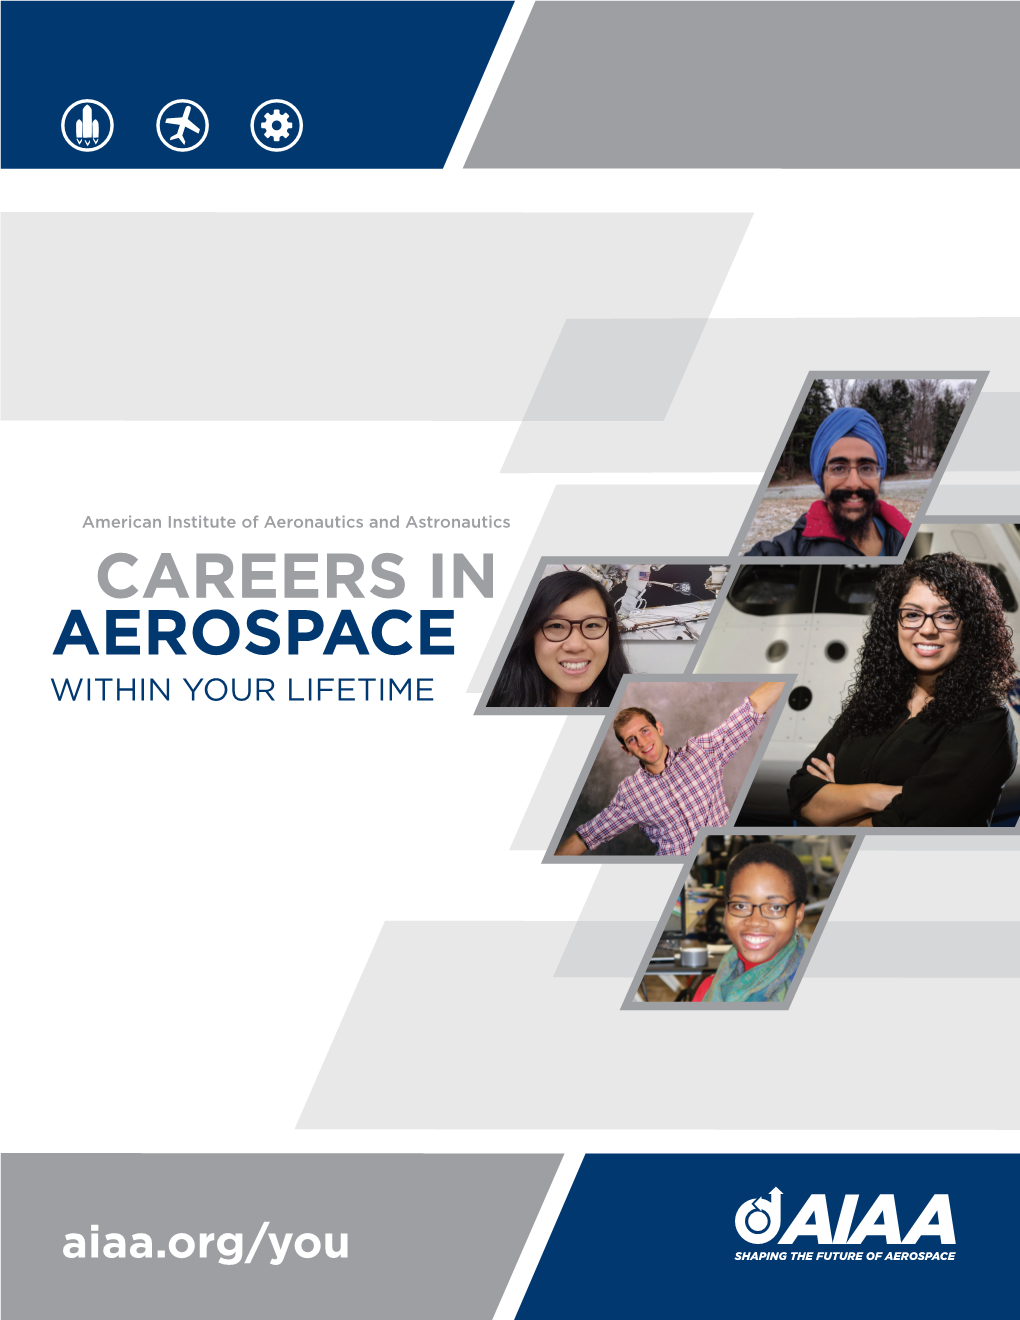 Careers in Aerospace Within Your Lifetime